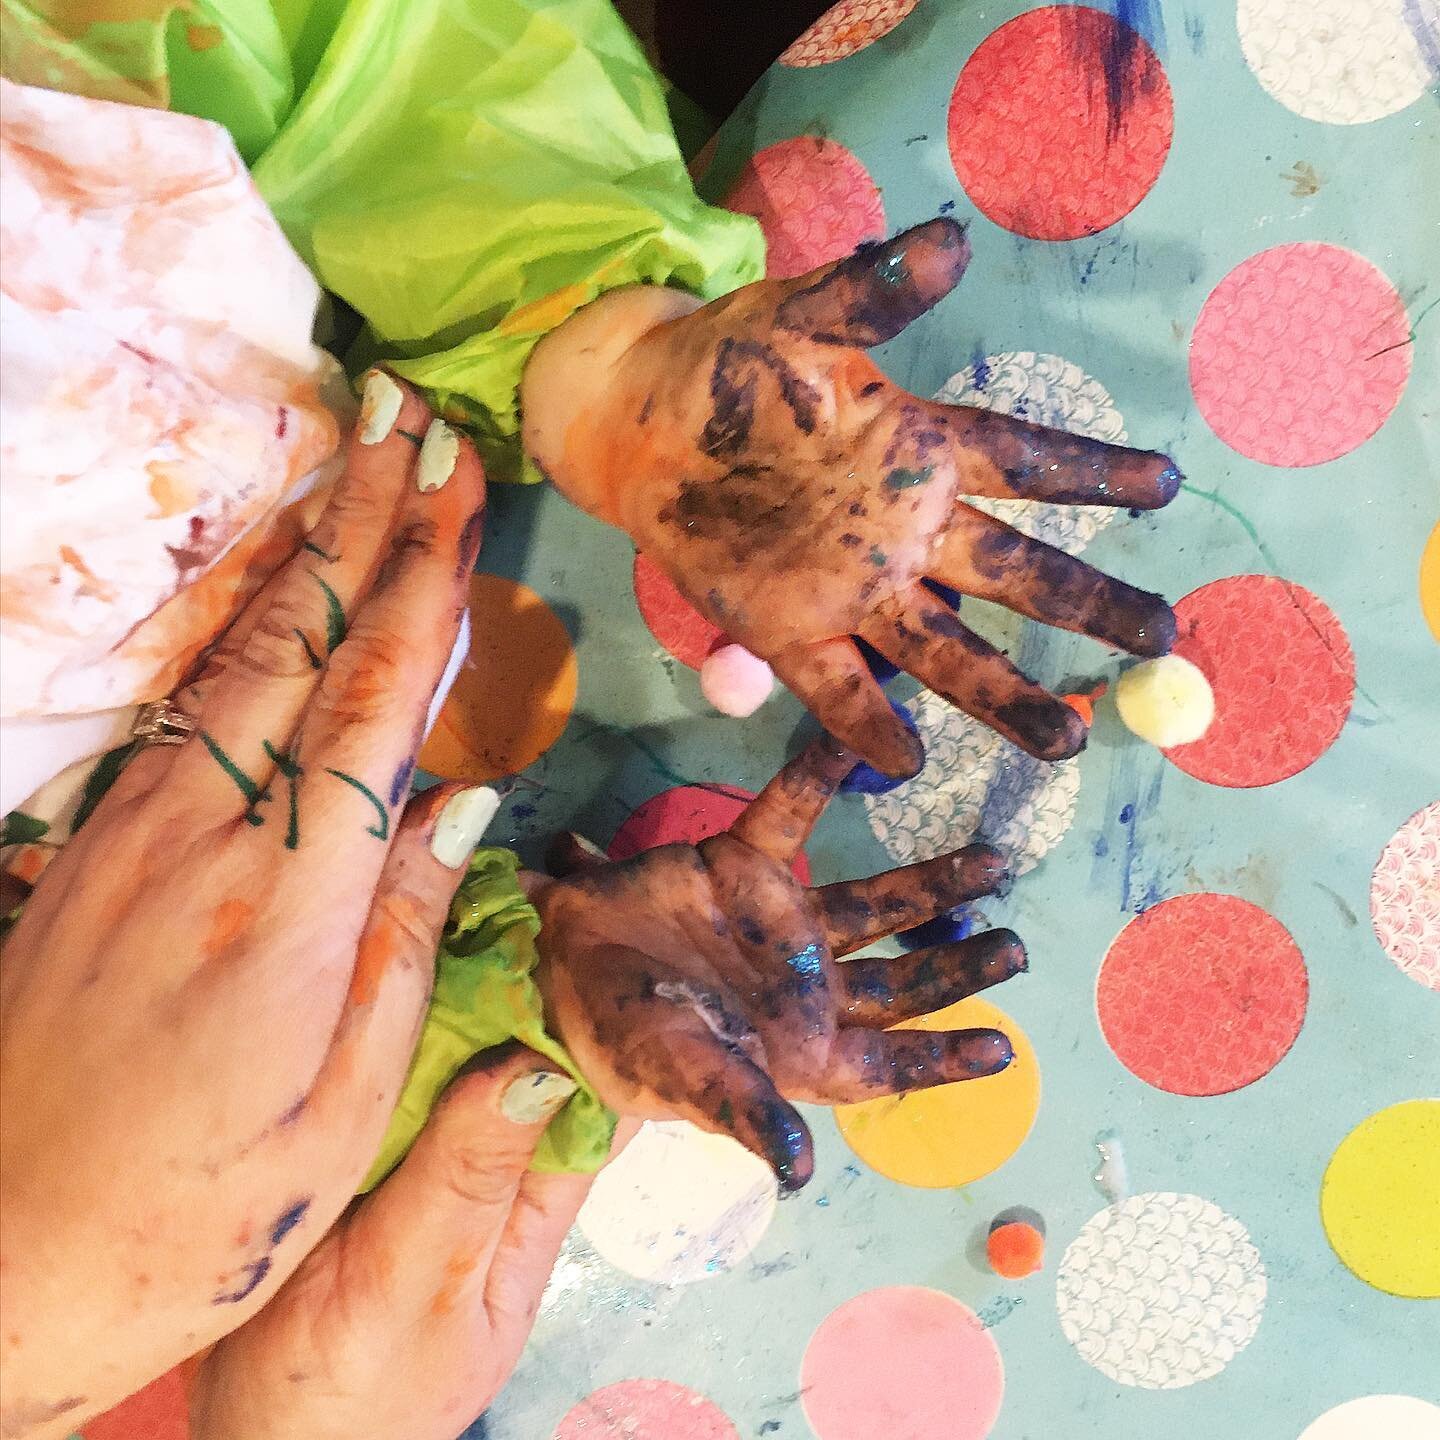 Messy hands from this mornings mummy and baby group - Halloween edition 🕷😋